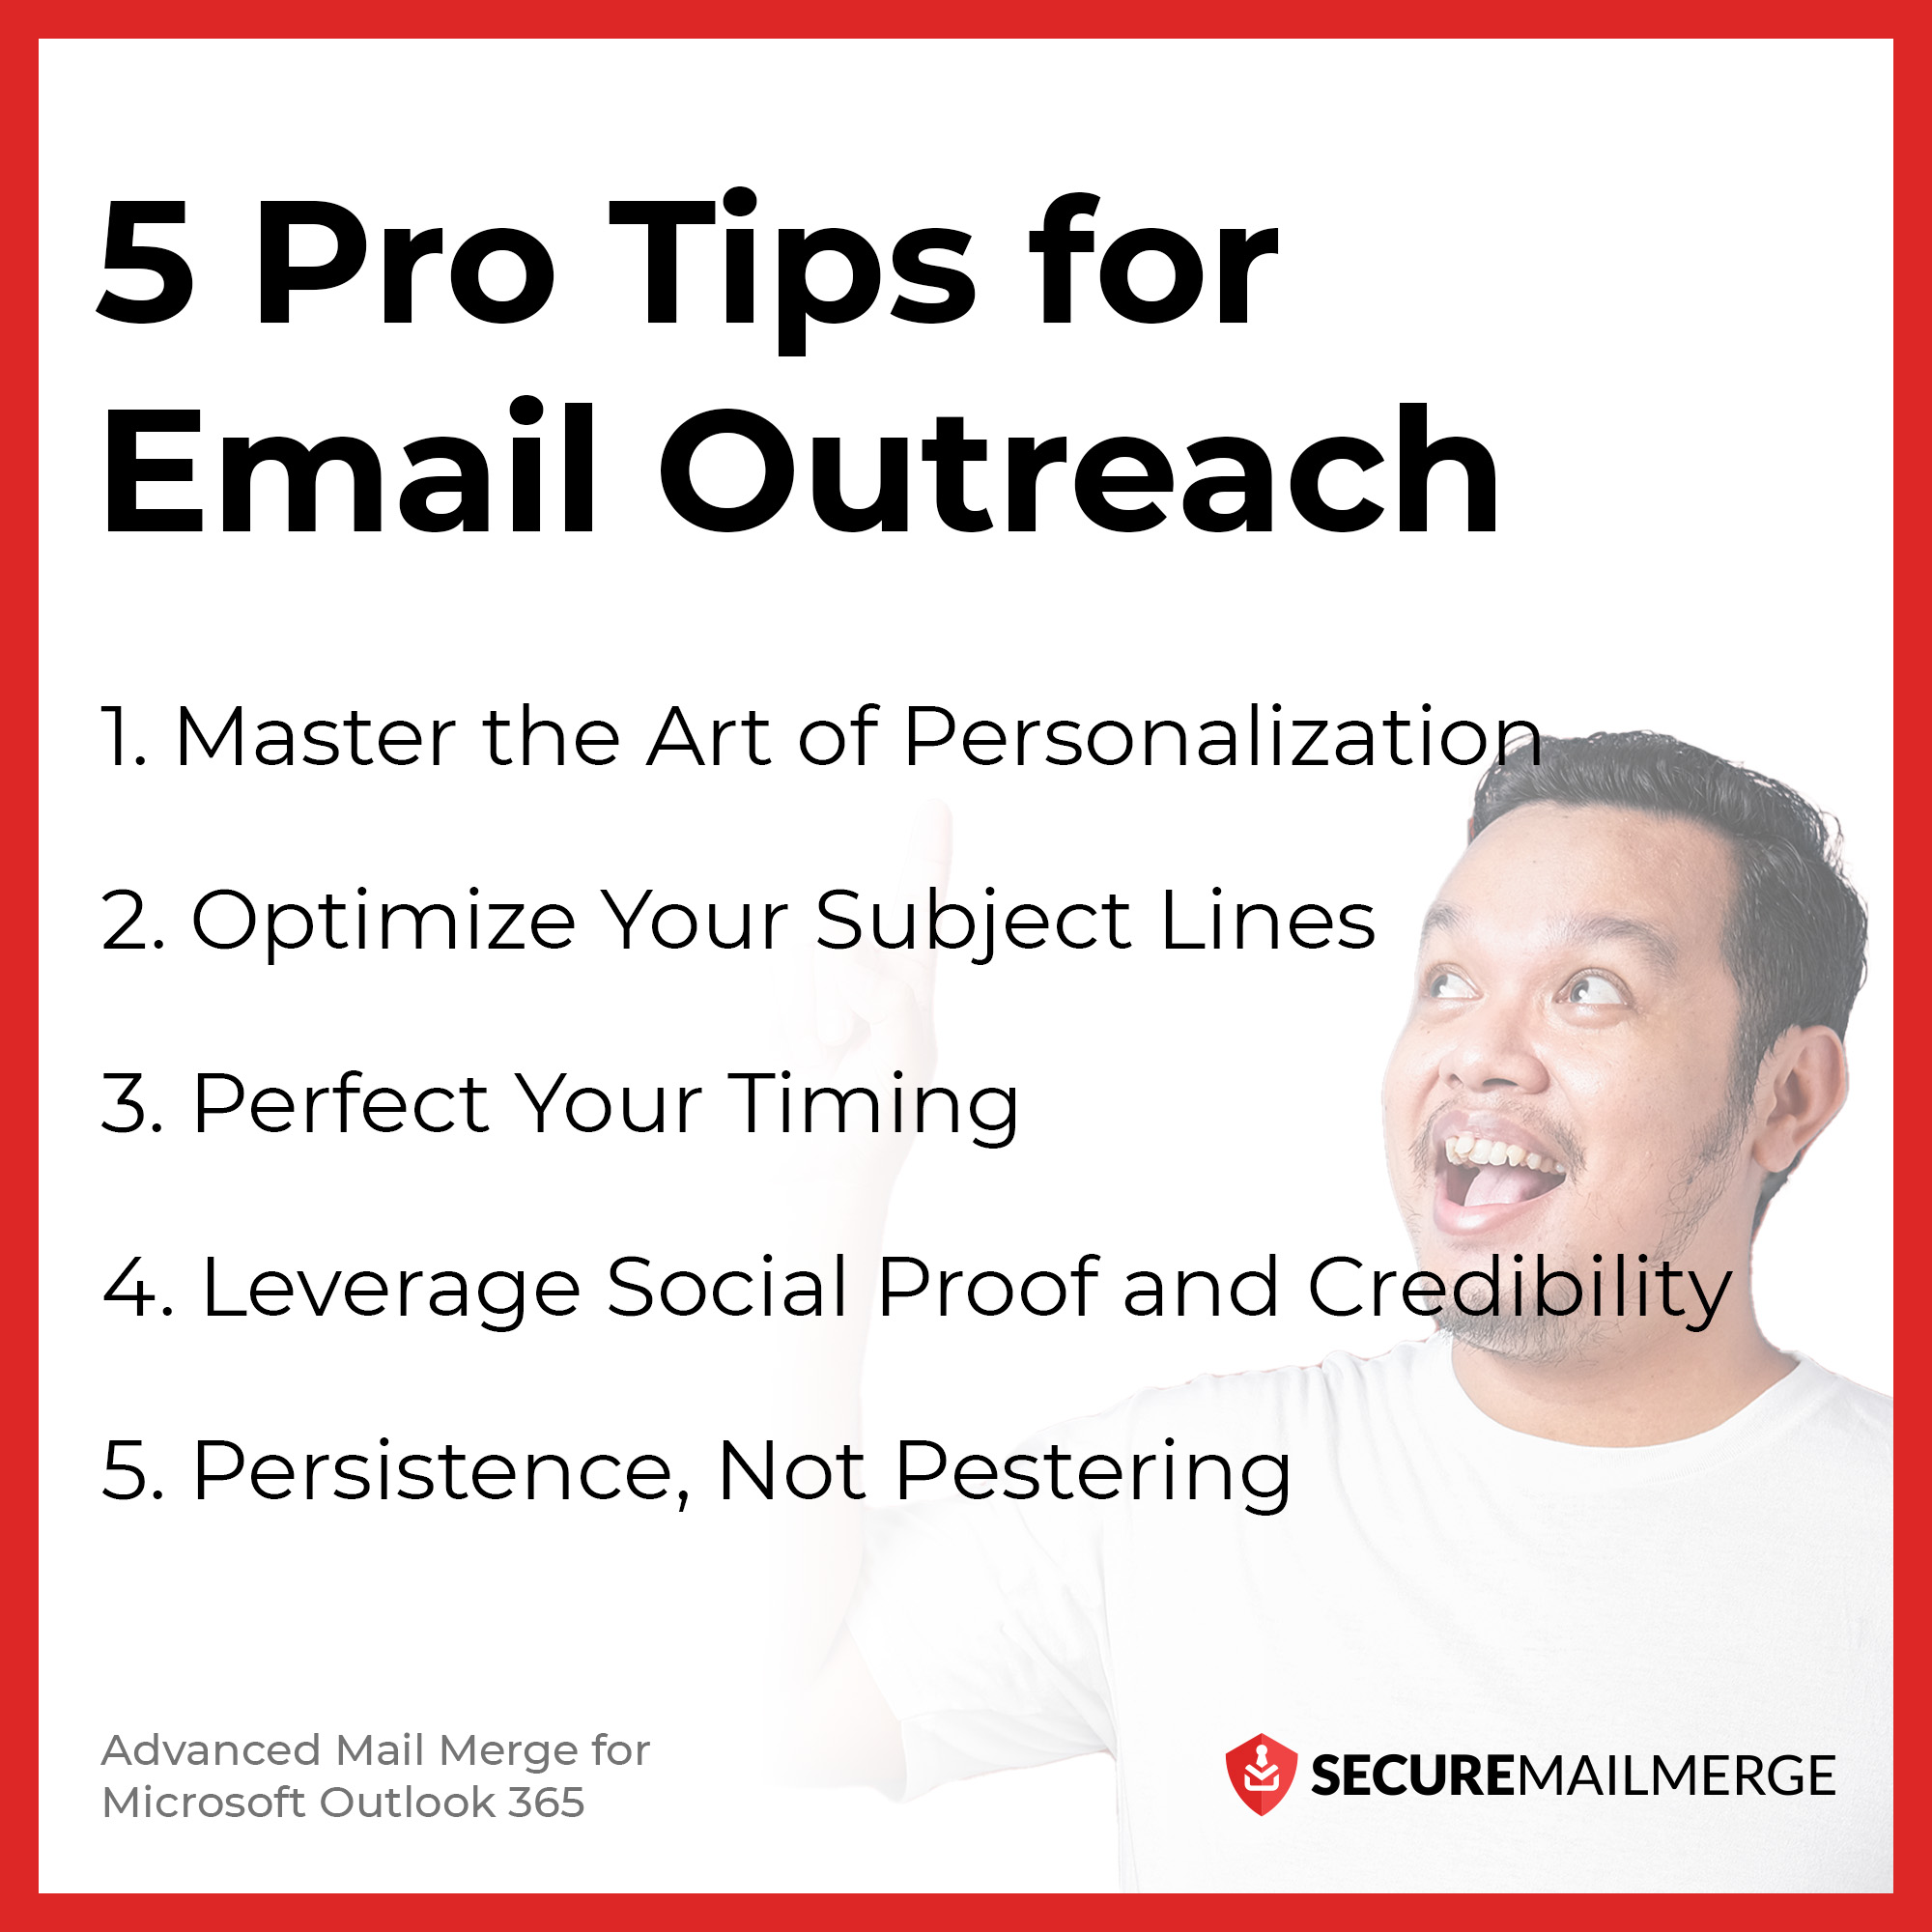 5 Pro Tips for Email Outreach